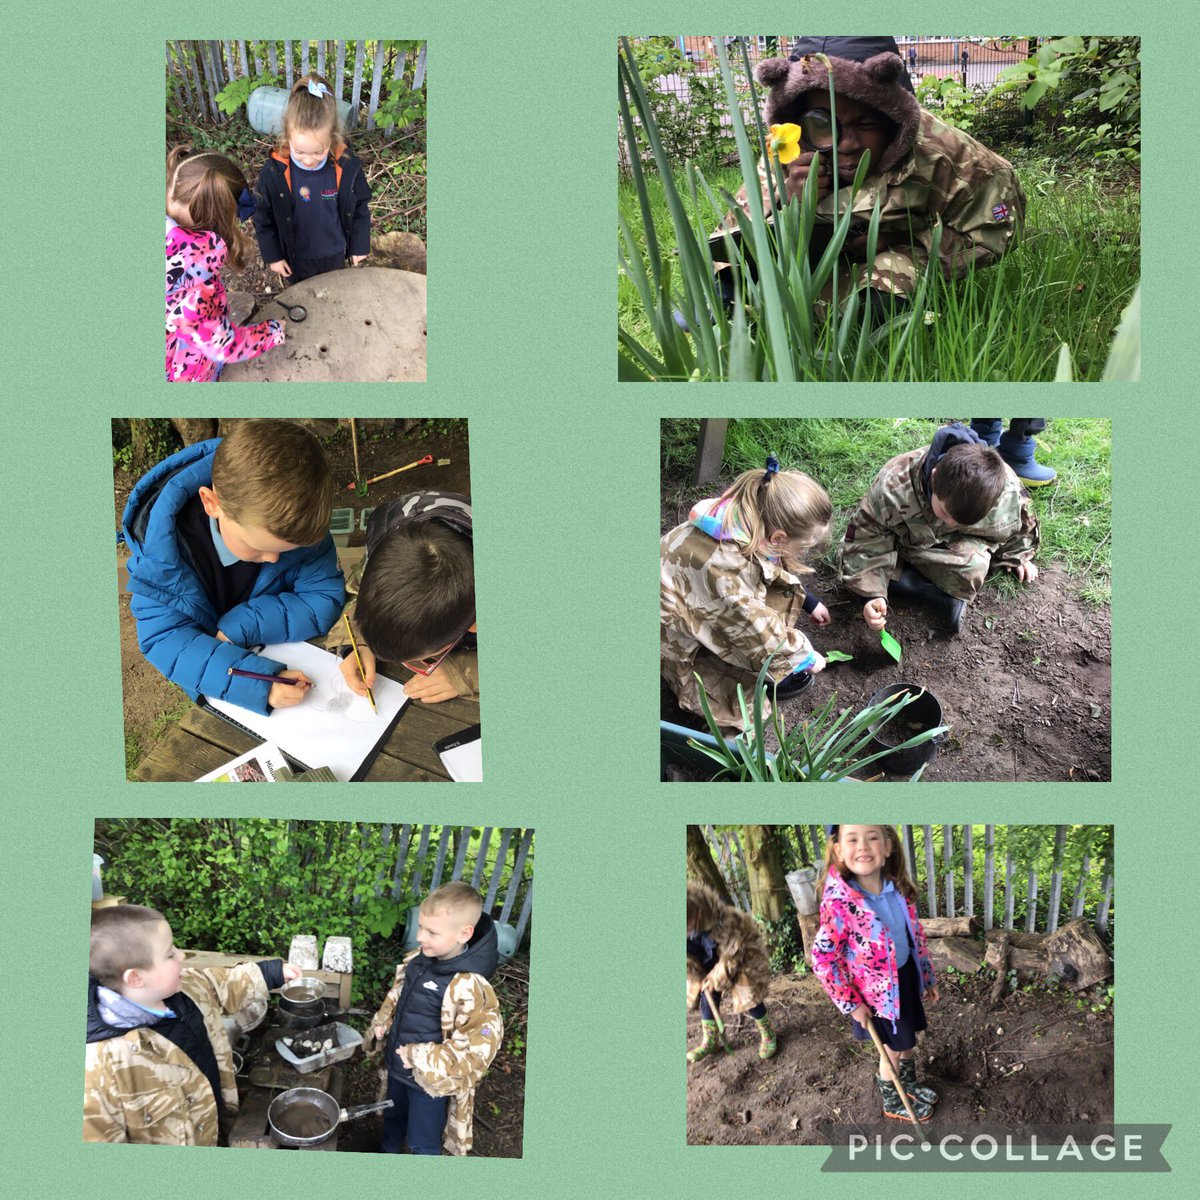 We had so much fun in Forest School! We explored the different areas and even made music! @ListerInfants